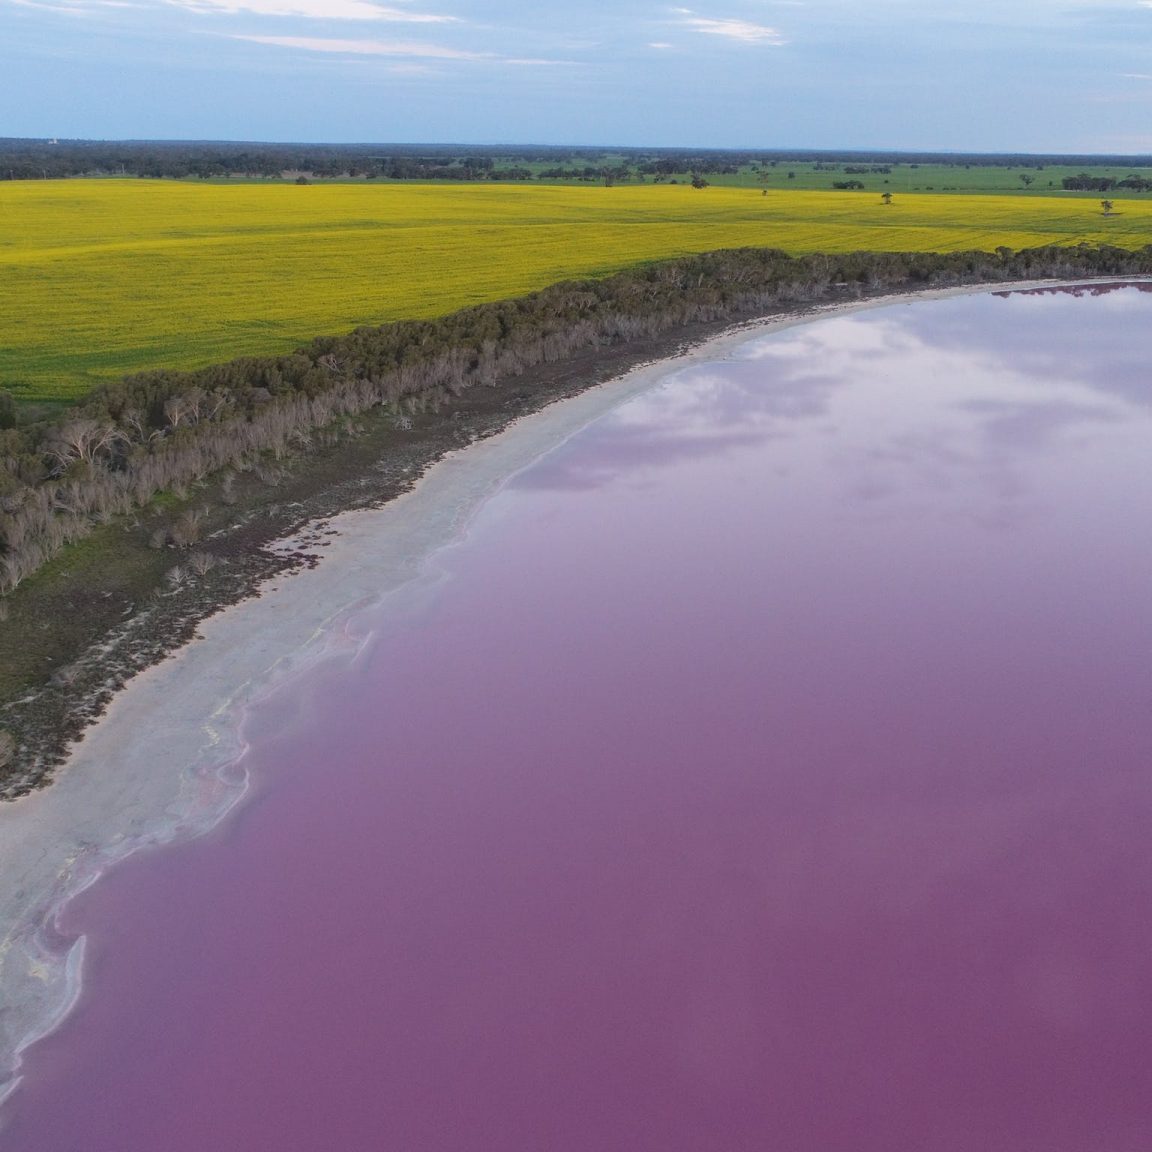 Vibrant pink lake in front of yellow canola crop in background